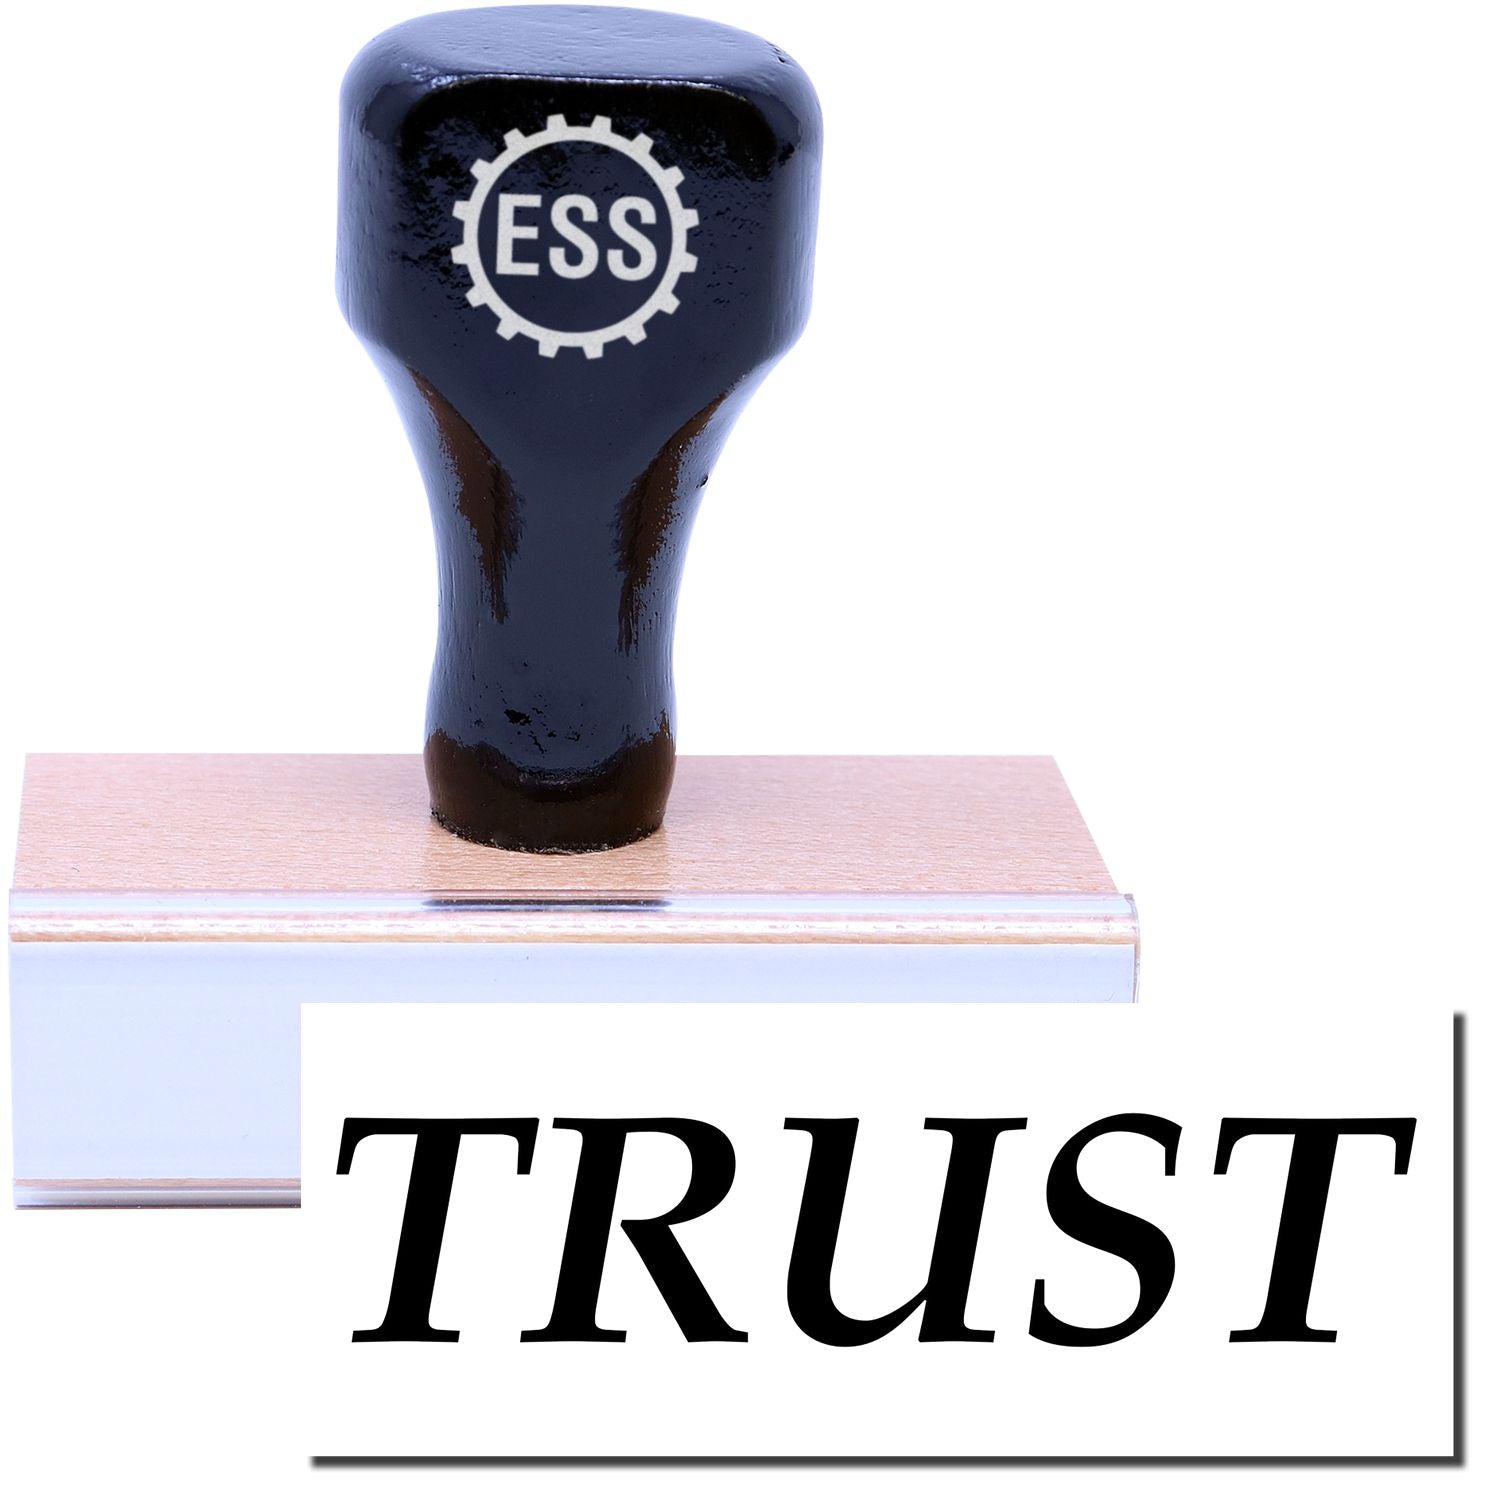 A stock office rubber stamp with a stamped image showing how the text "TRUST" in a large font is displayed after stamping.